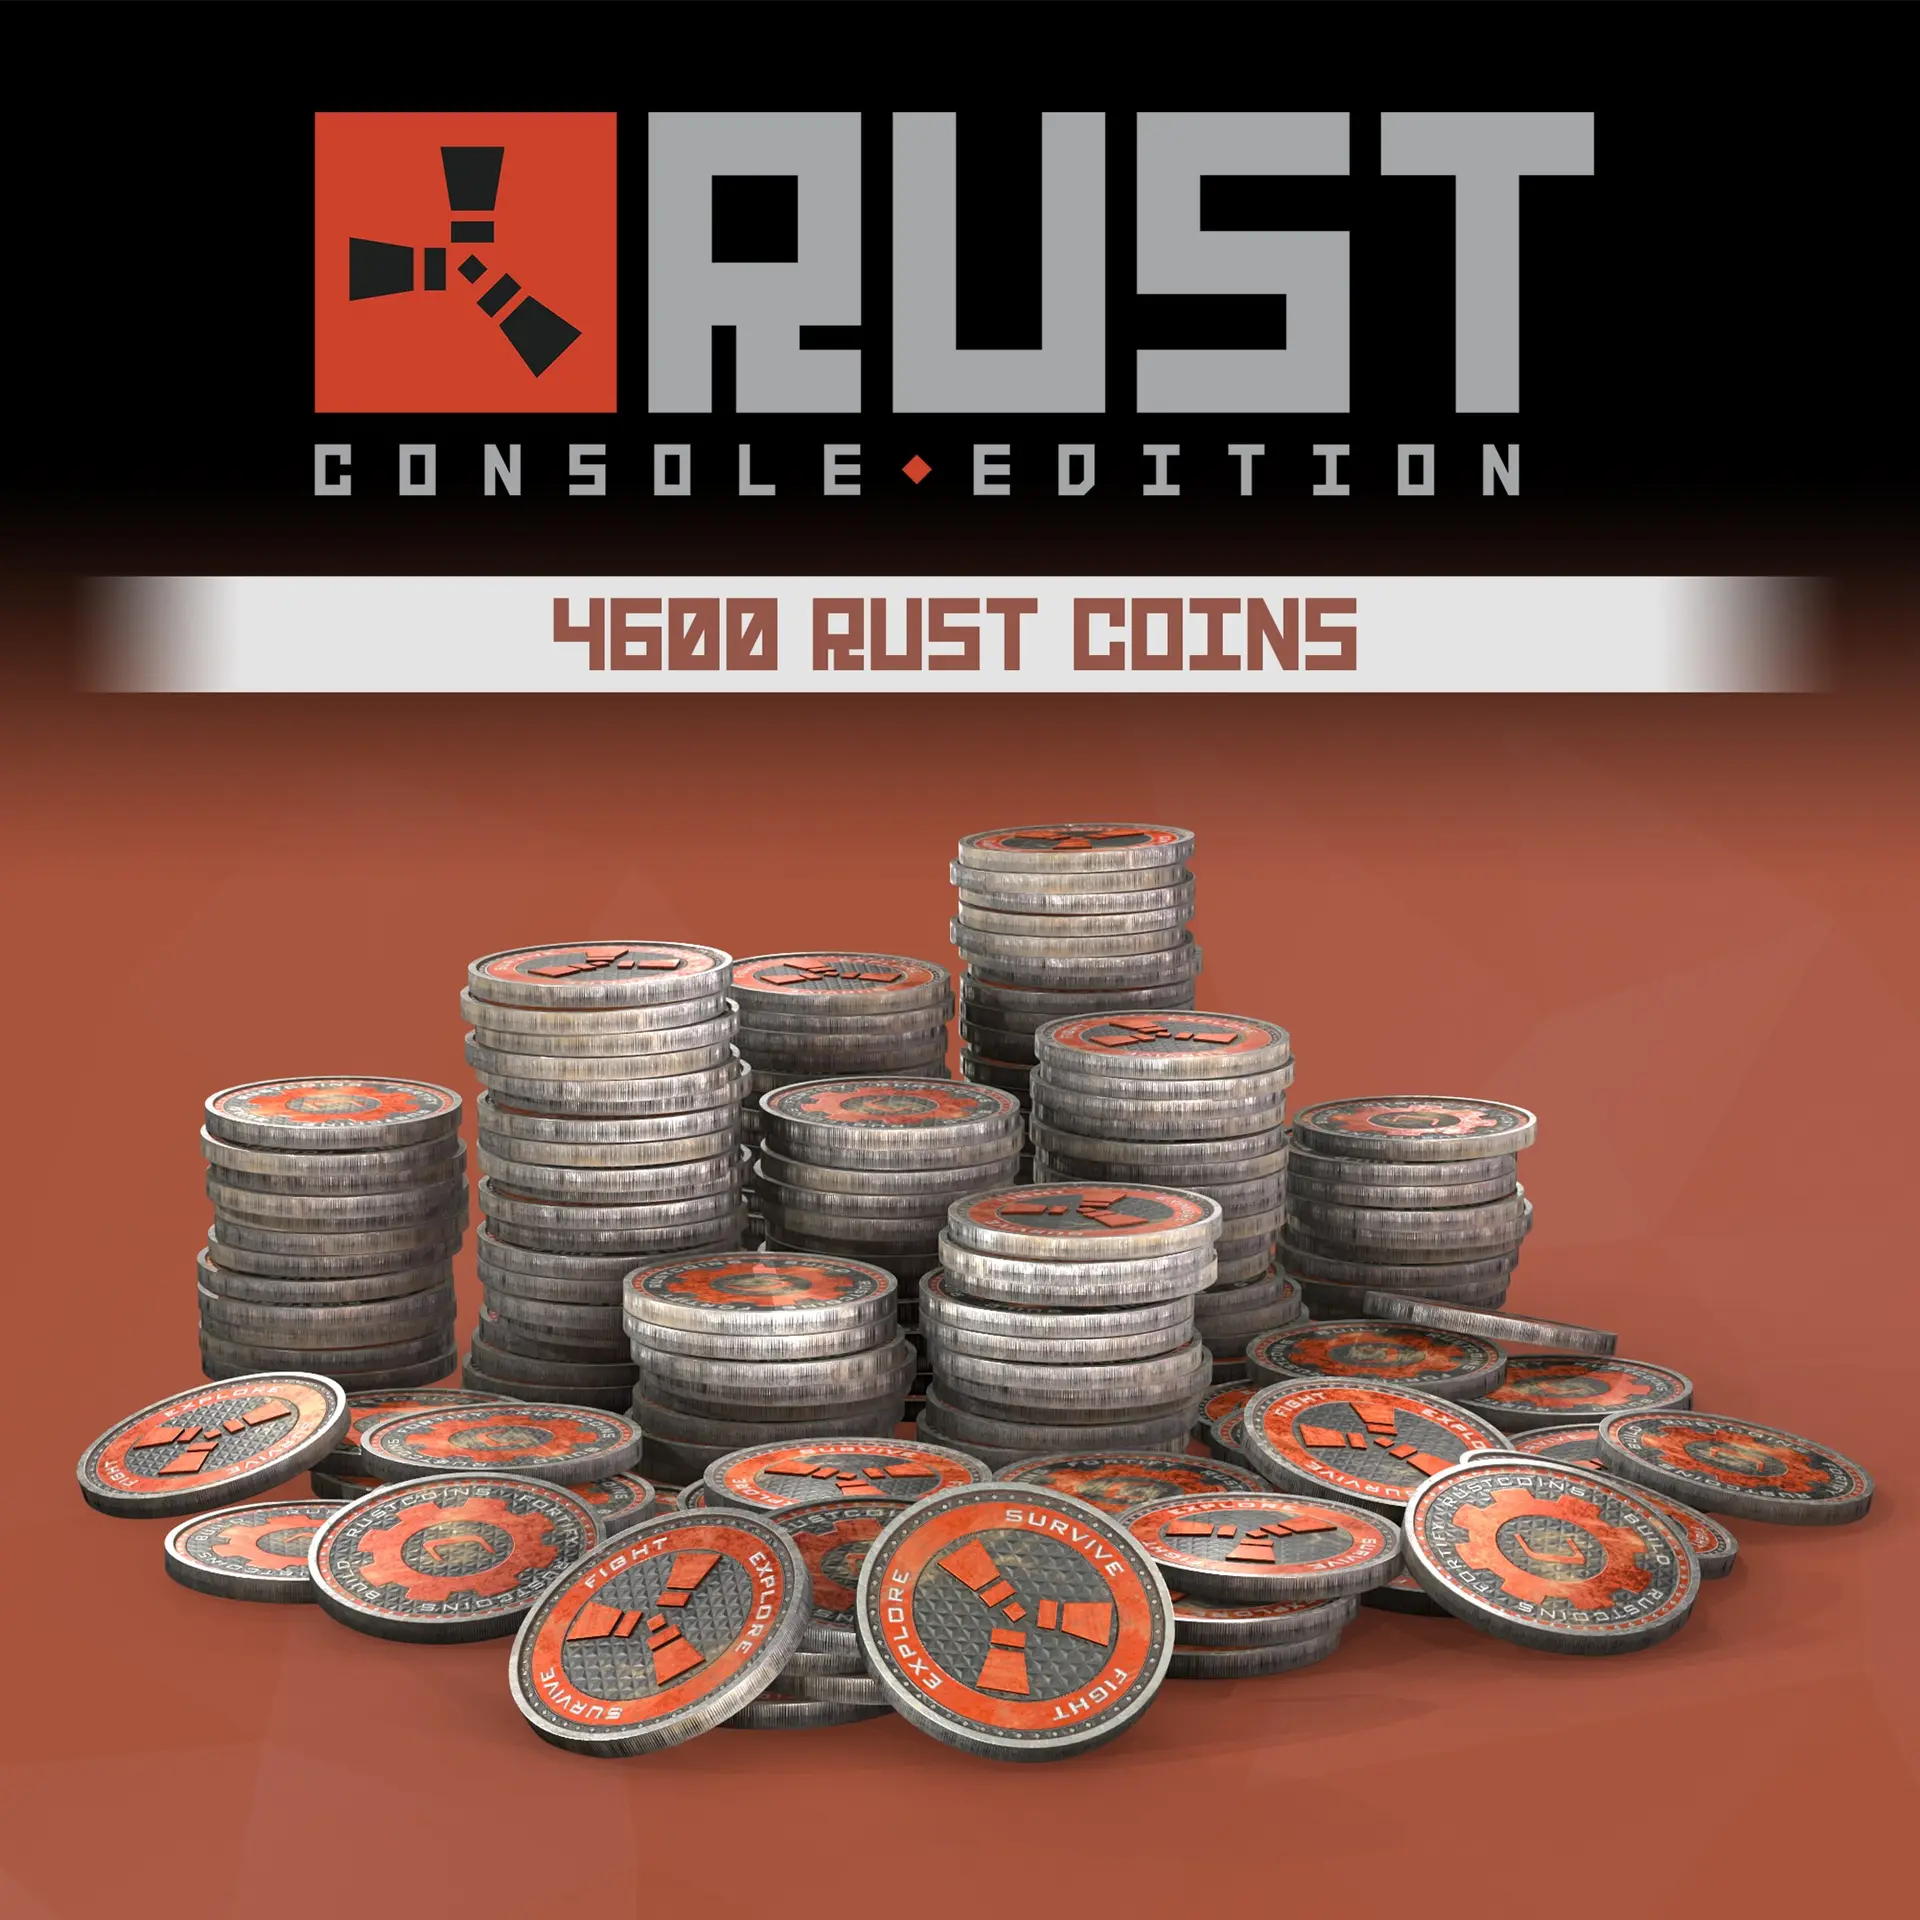 Rust Console Edition - 4600 Rust Coins (Xbox Game EU)